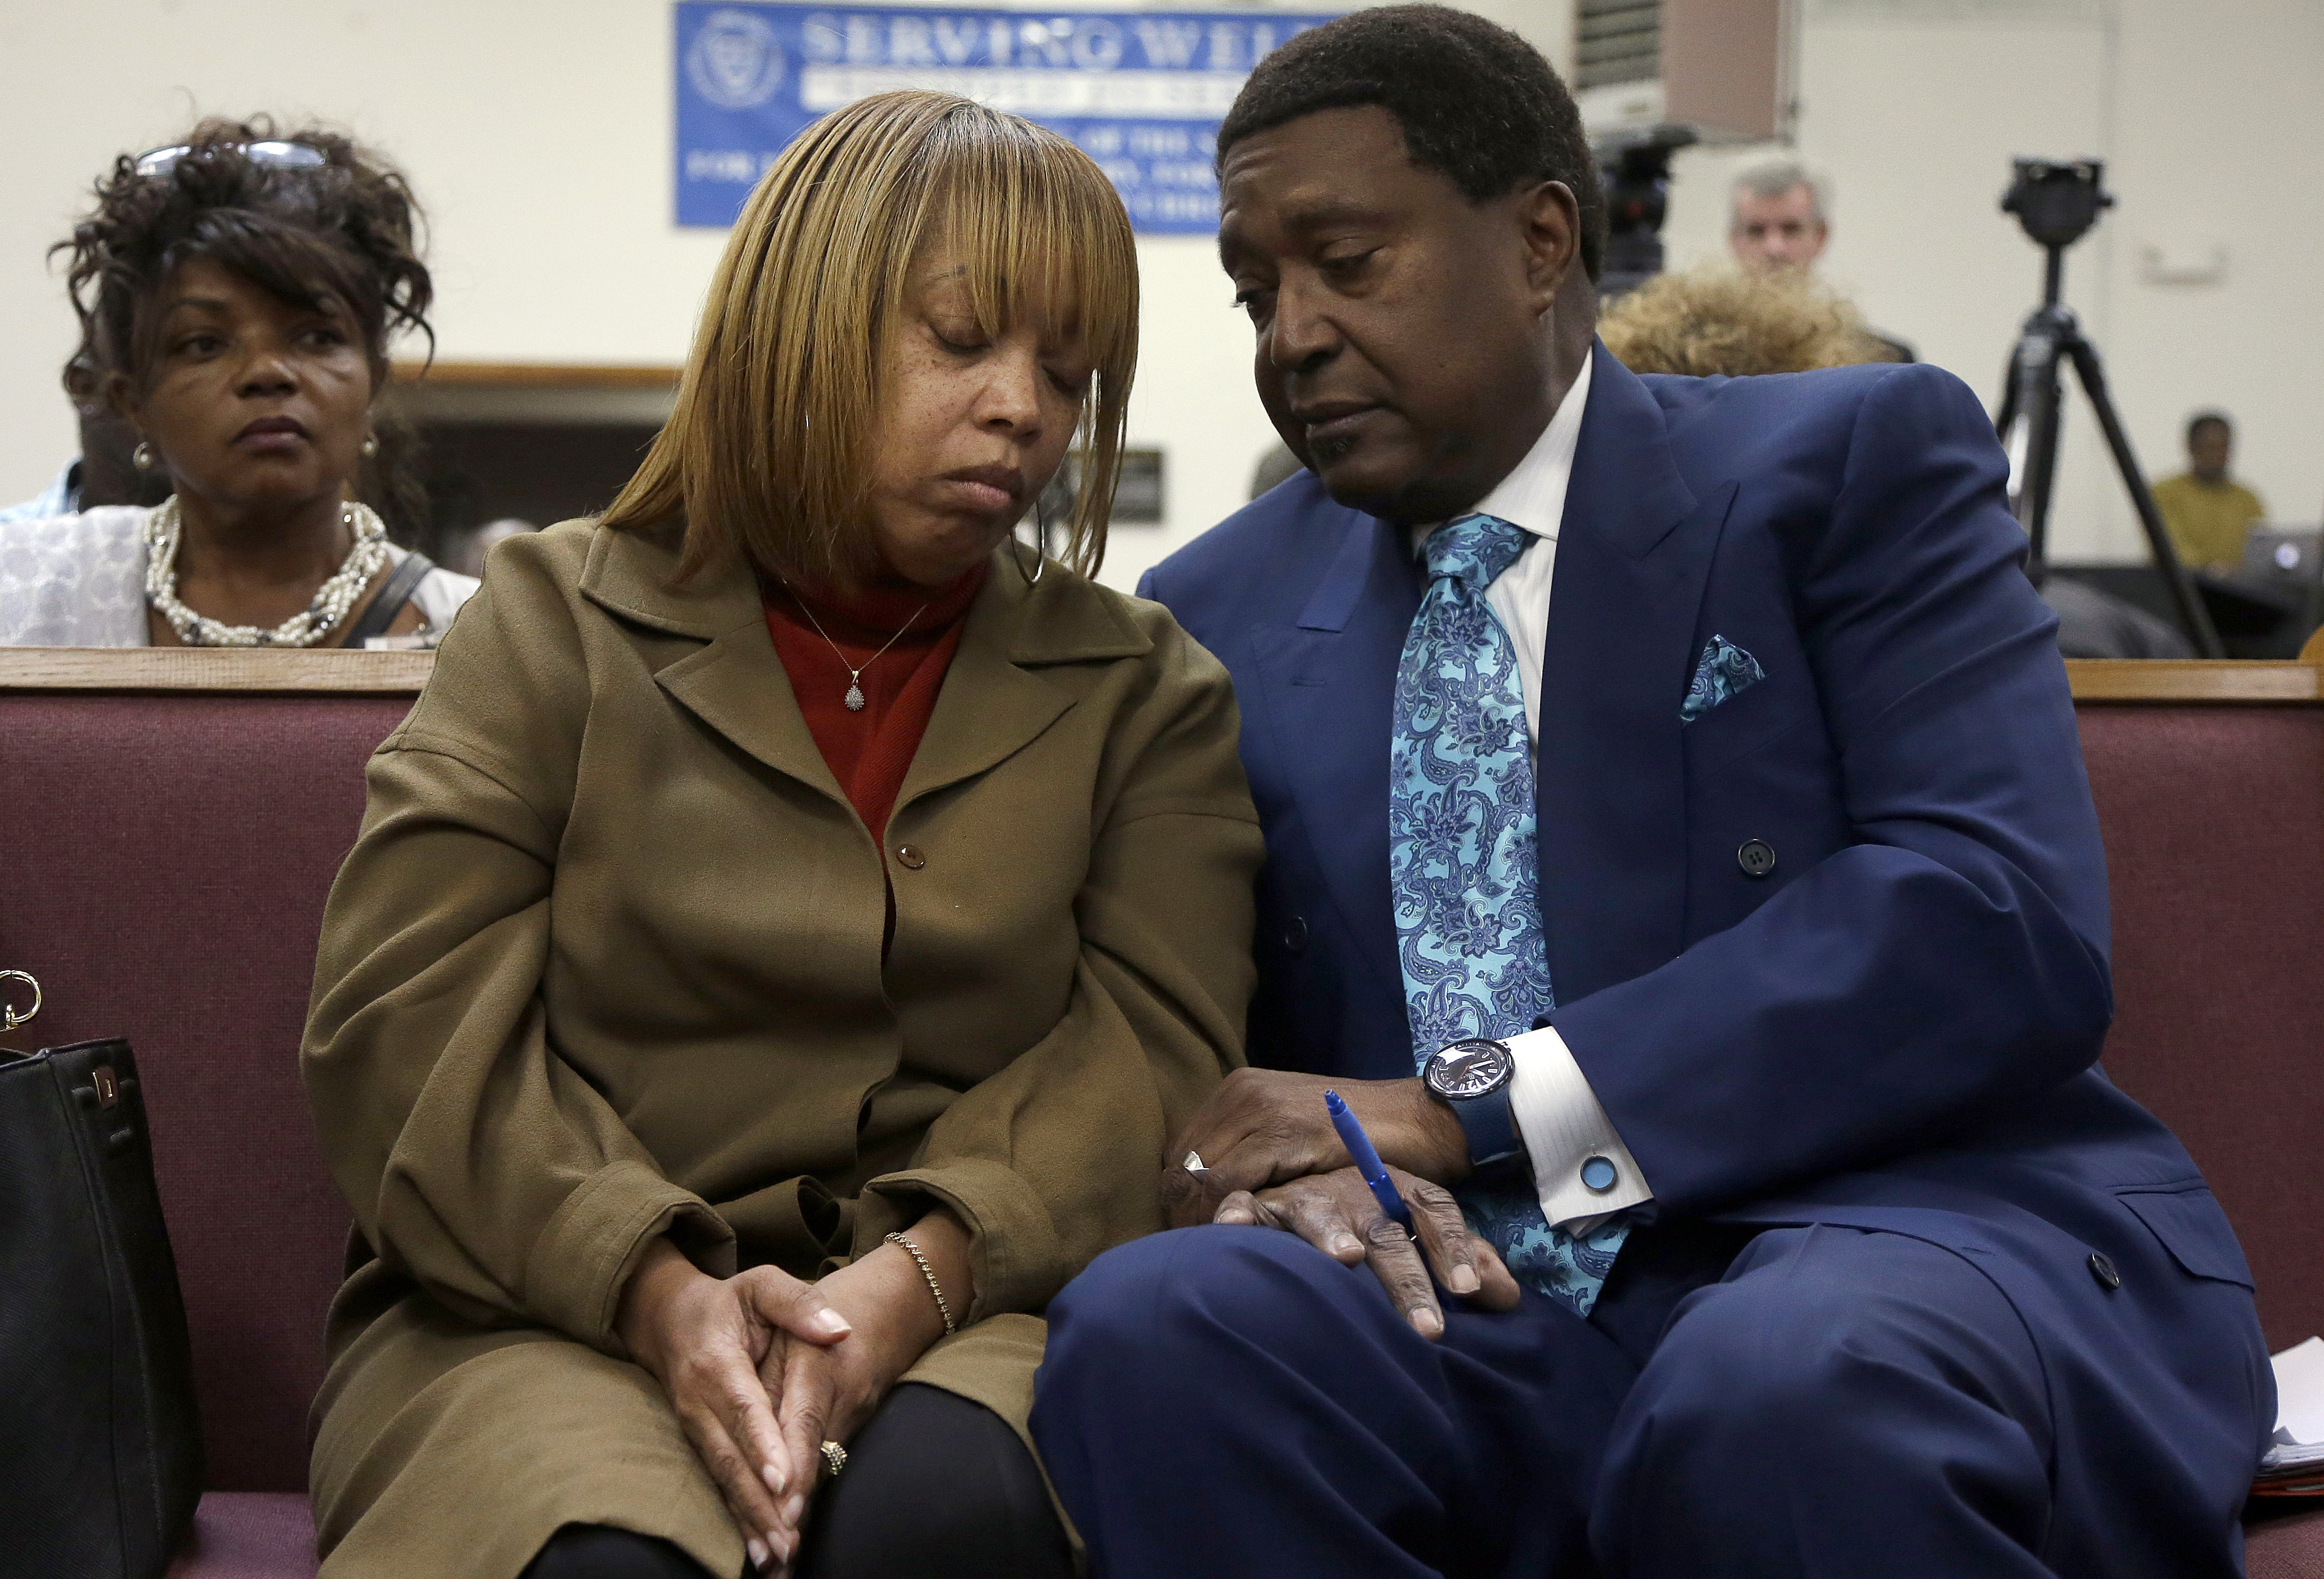 Attorney John Burris, right, talks with Gwendolyn Woods, the mother of Mario Woods, the man killed by San Francisco police after they say he appeared to raise a knife and approach an officer, San Francisco, Jan. 18, 2016 (Jeff Chiu—AP)